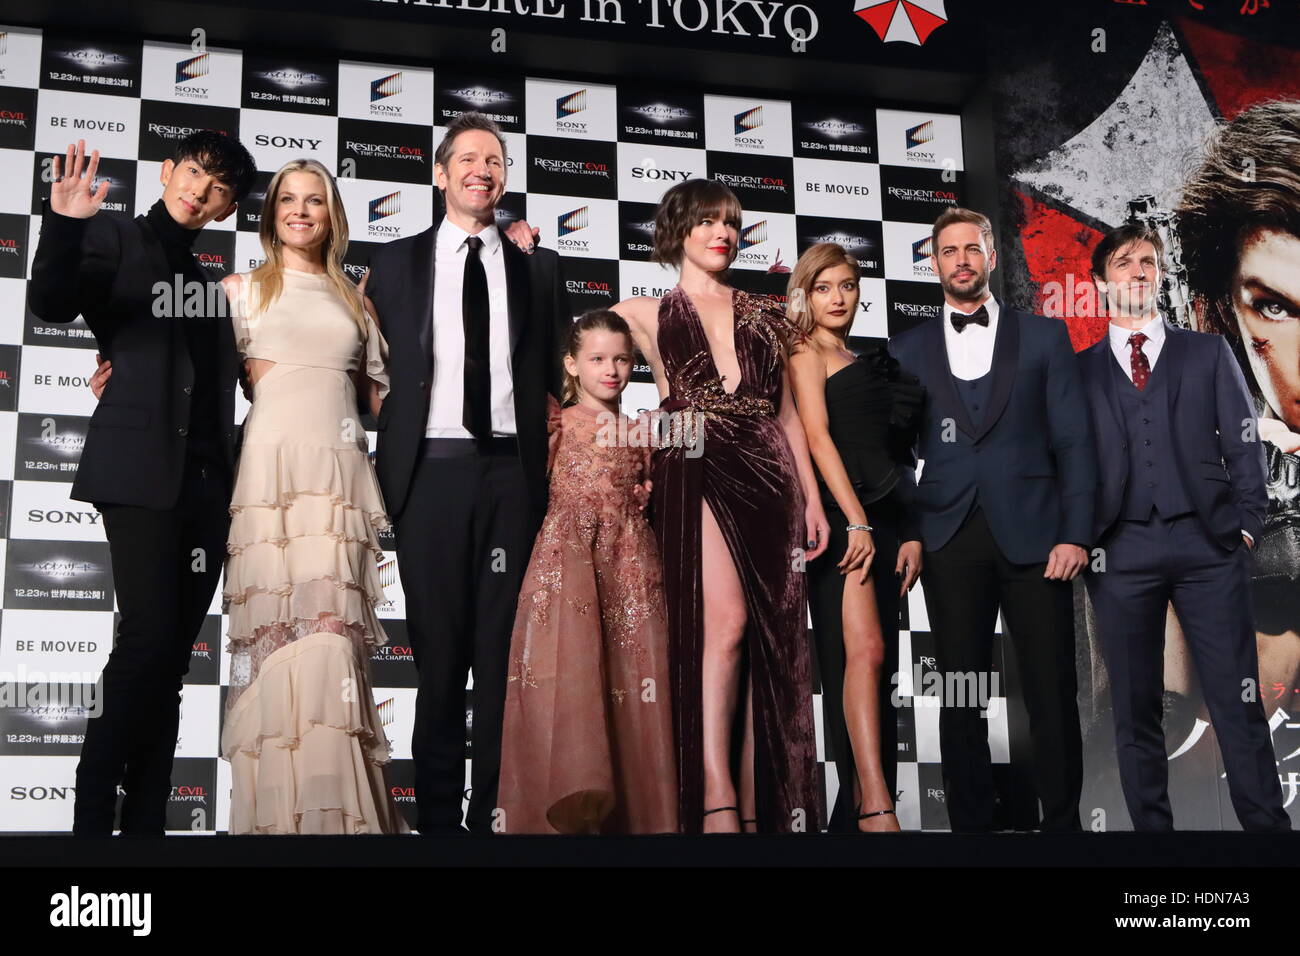 Tokyo, Japan. 13th Dec, 2016. Actor Lee Joon-gi and actress Ali Larter  attend the world premiere of the film Resident Evil: The Final Chapter in  Tokyo, Japan on December 13, 2016. Credit